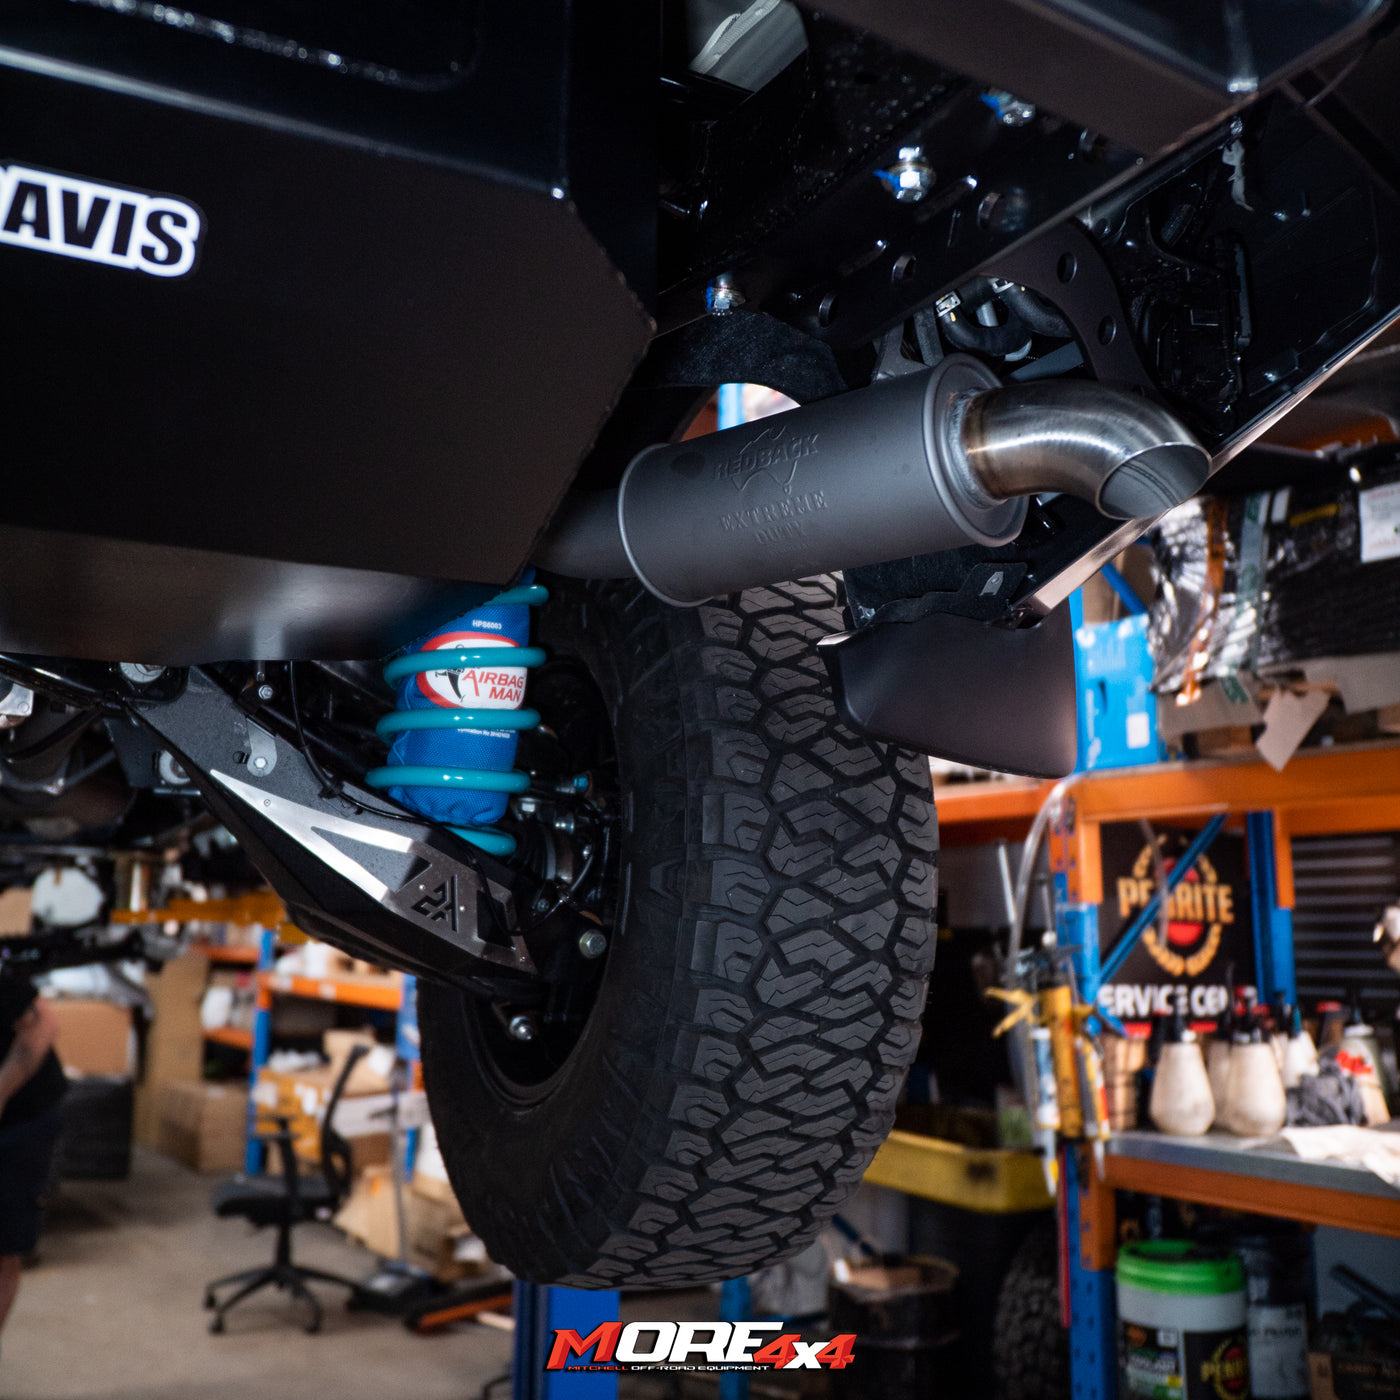 REDBACK EXHAUST - Twin 3” into Single 3” with STRAIGHT PIPE - Y62 PATROL